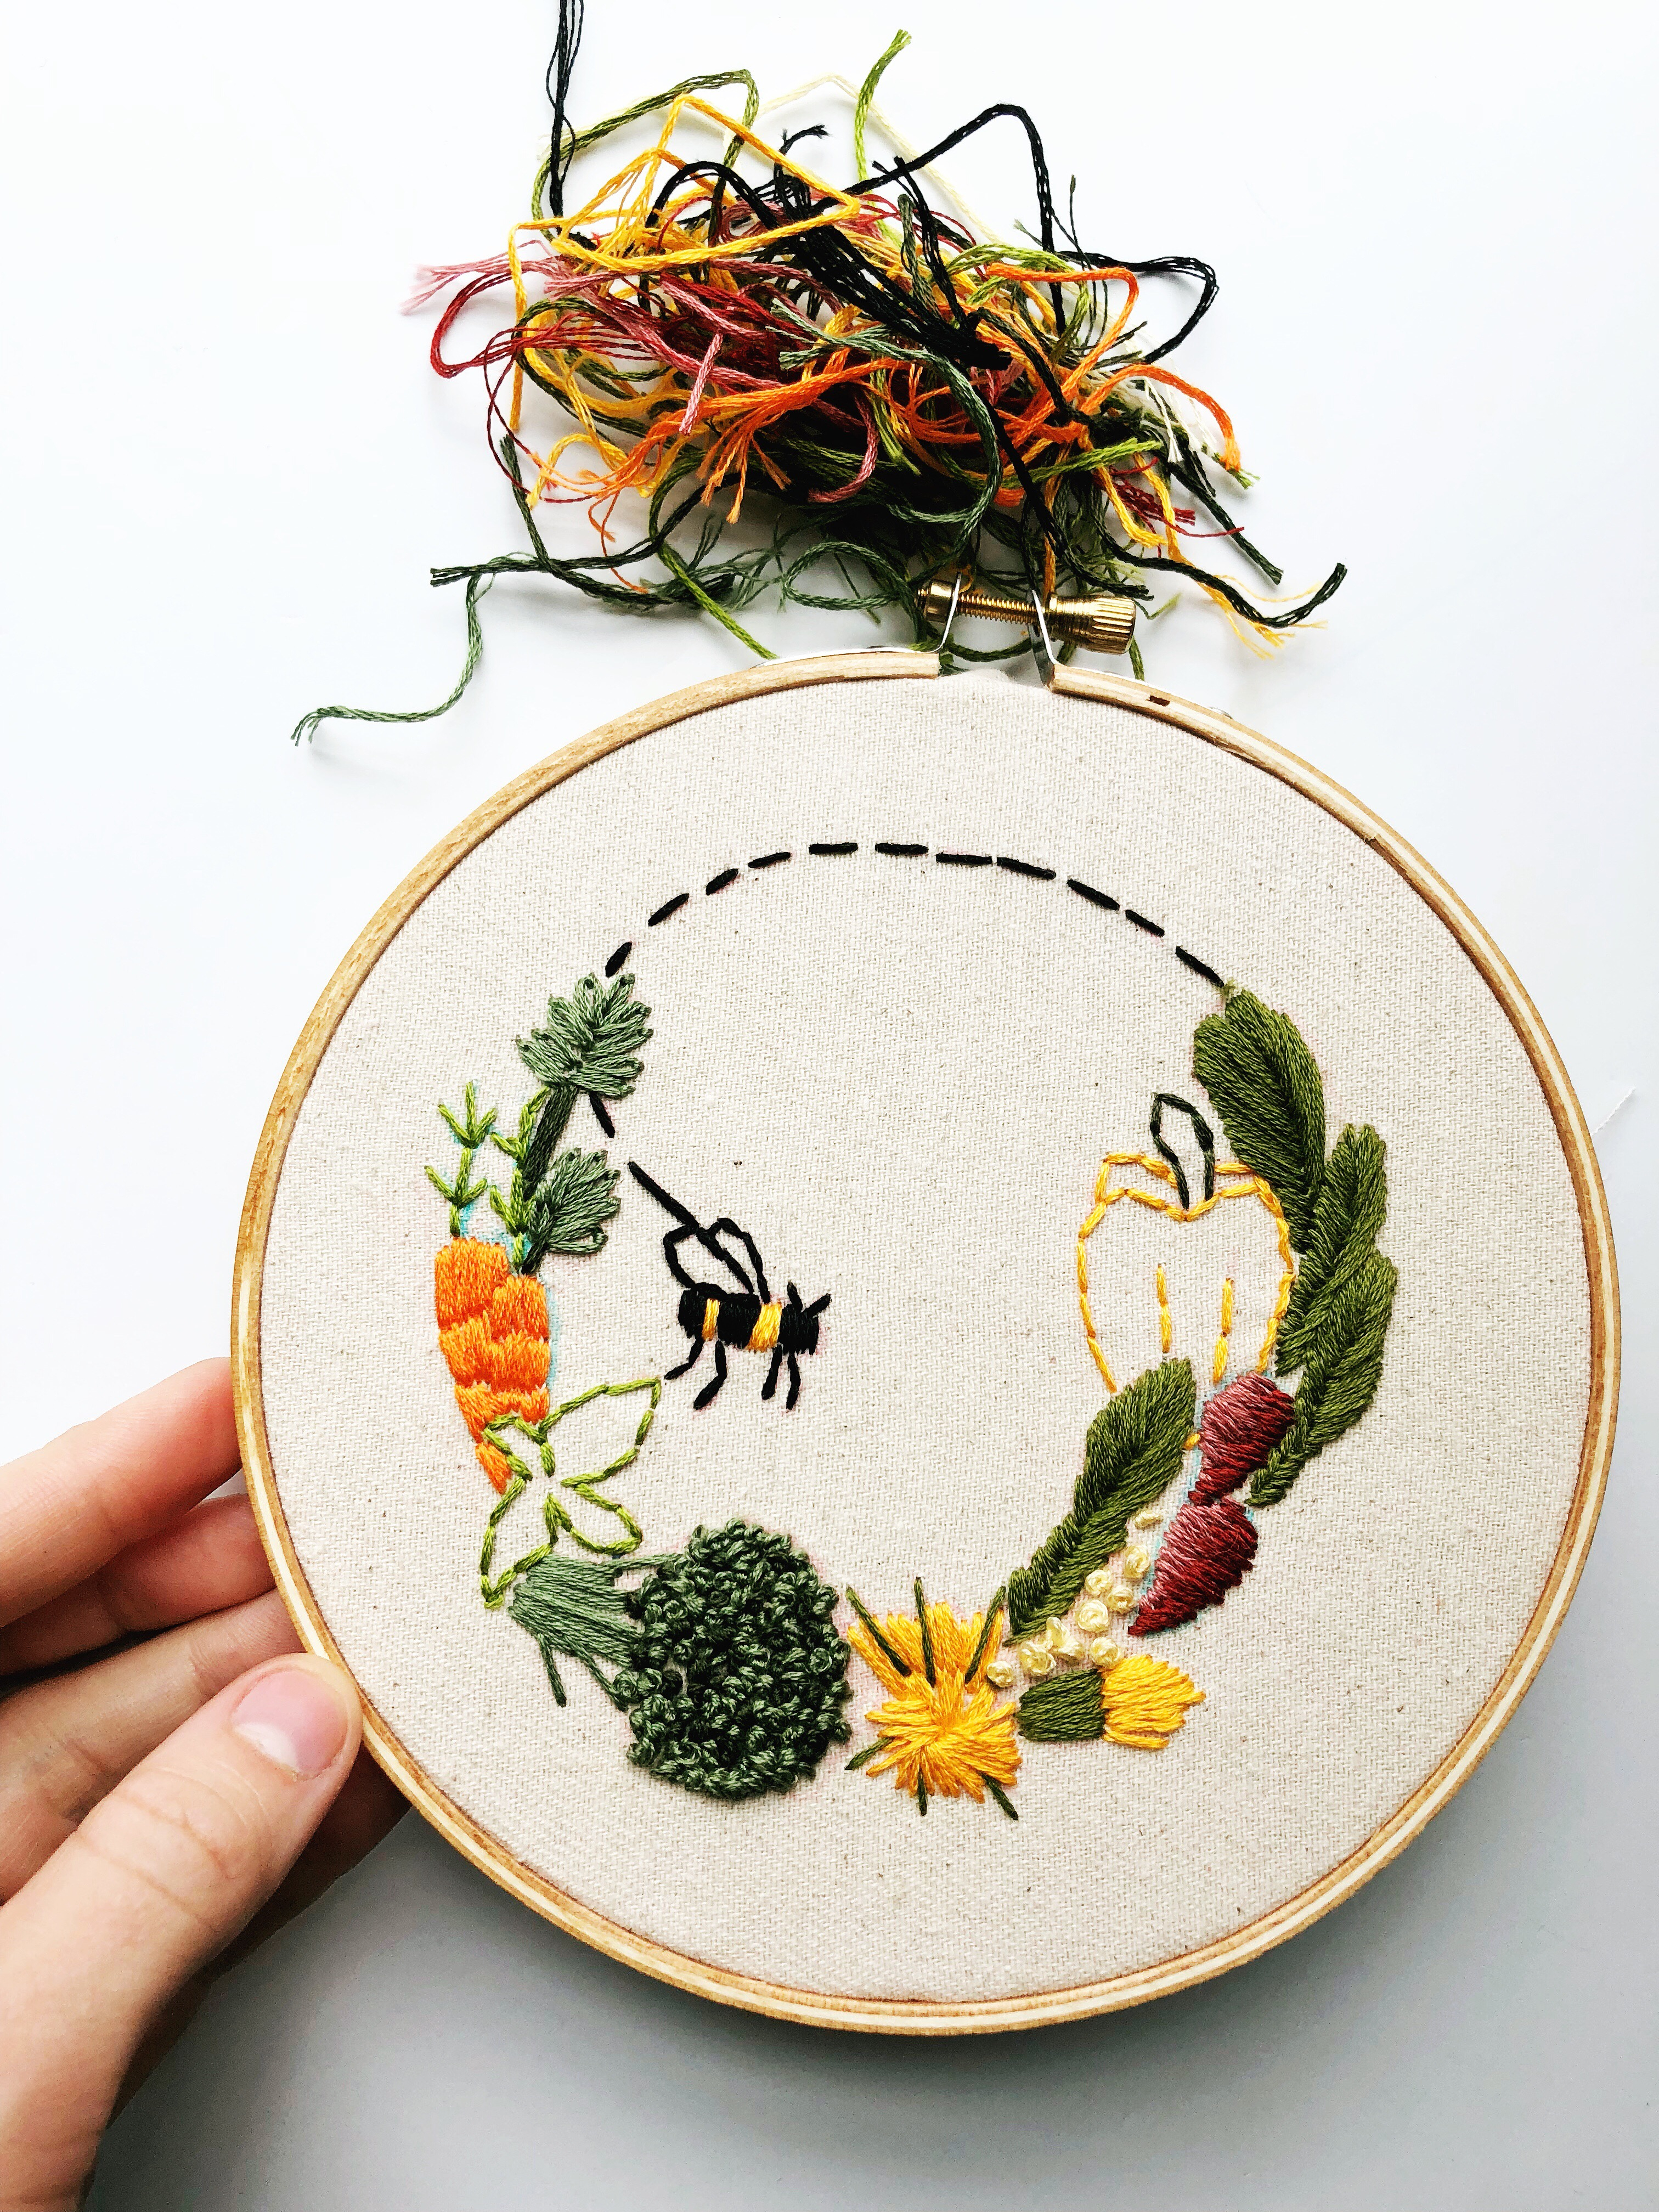 Embroidery Patterns Pdf Bee Embroidery Pattern